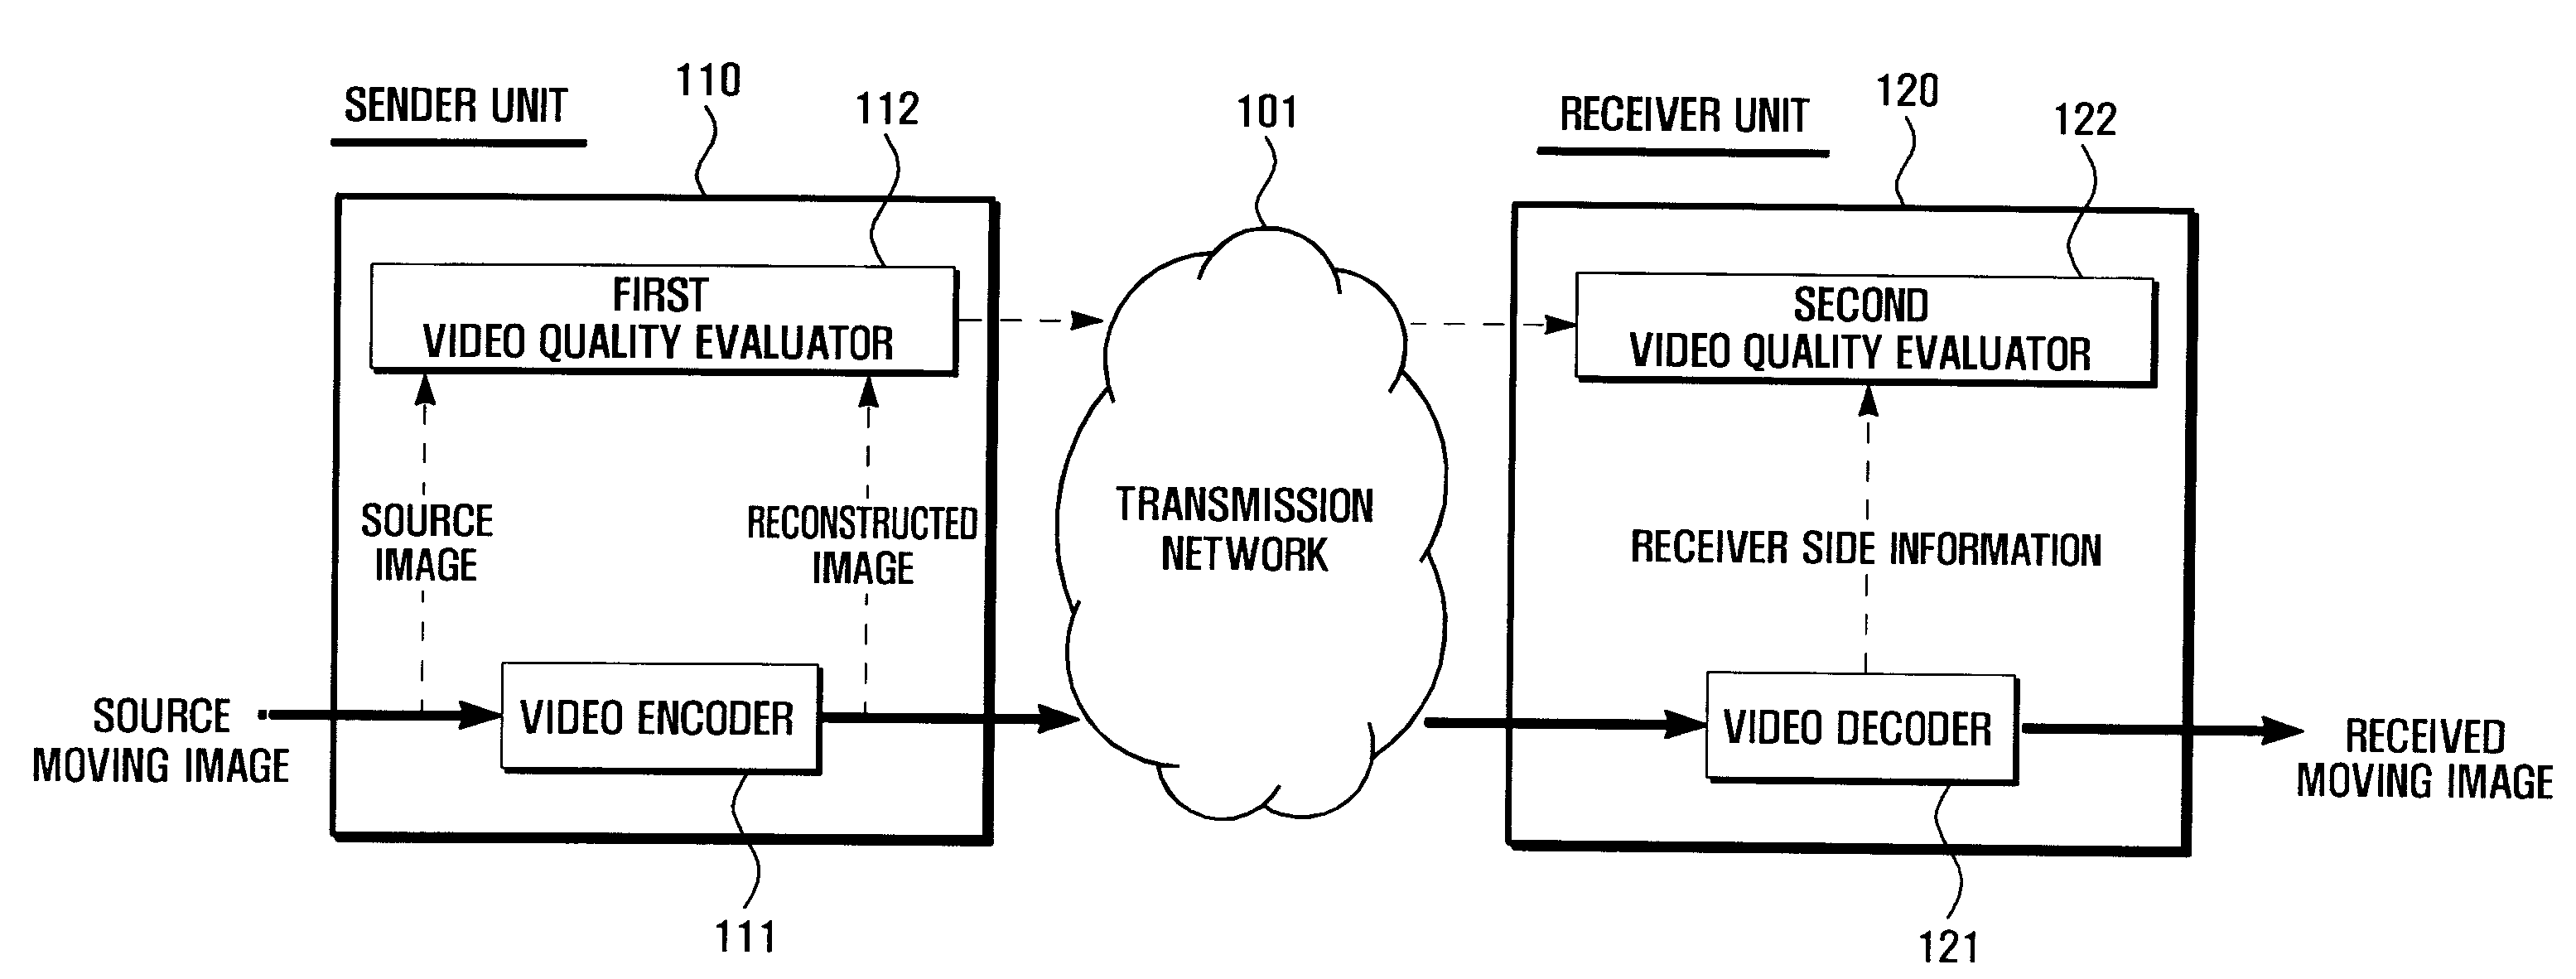 System and method for real-time video quality assessment based on transmission properties